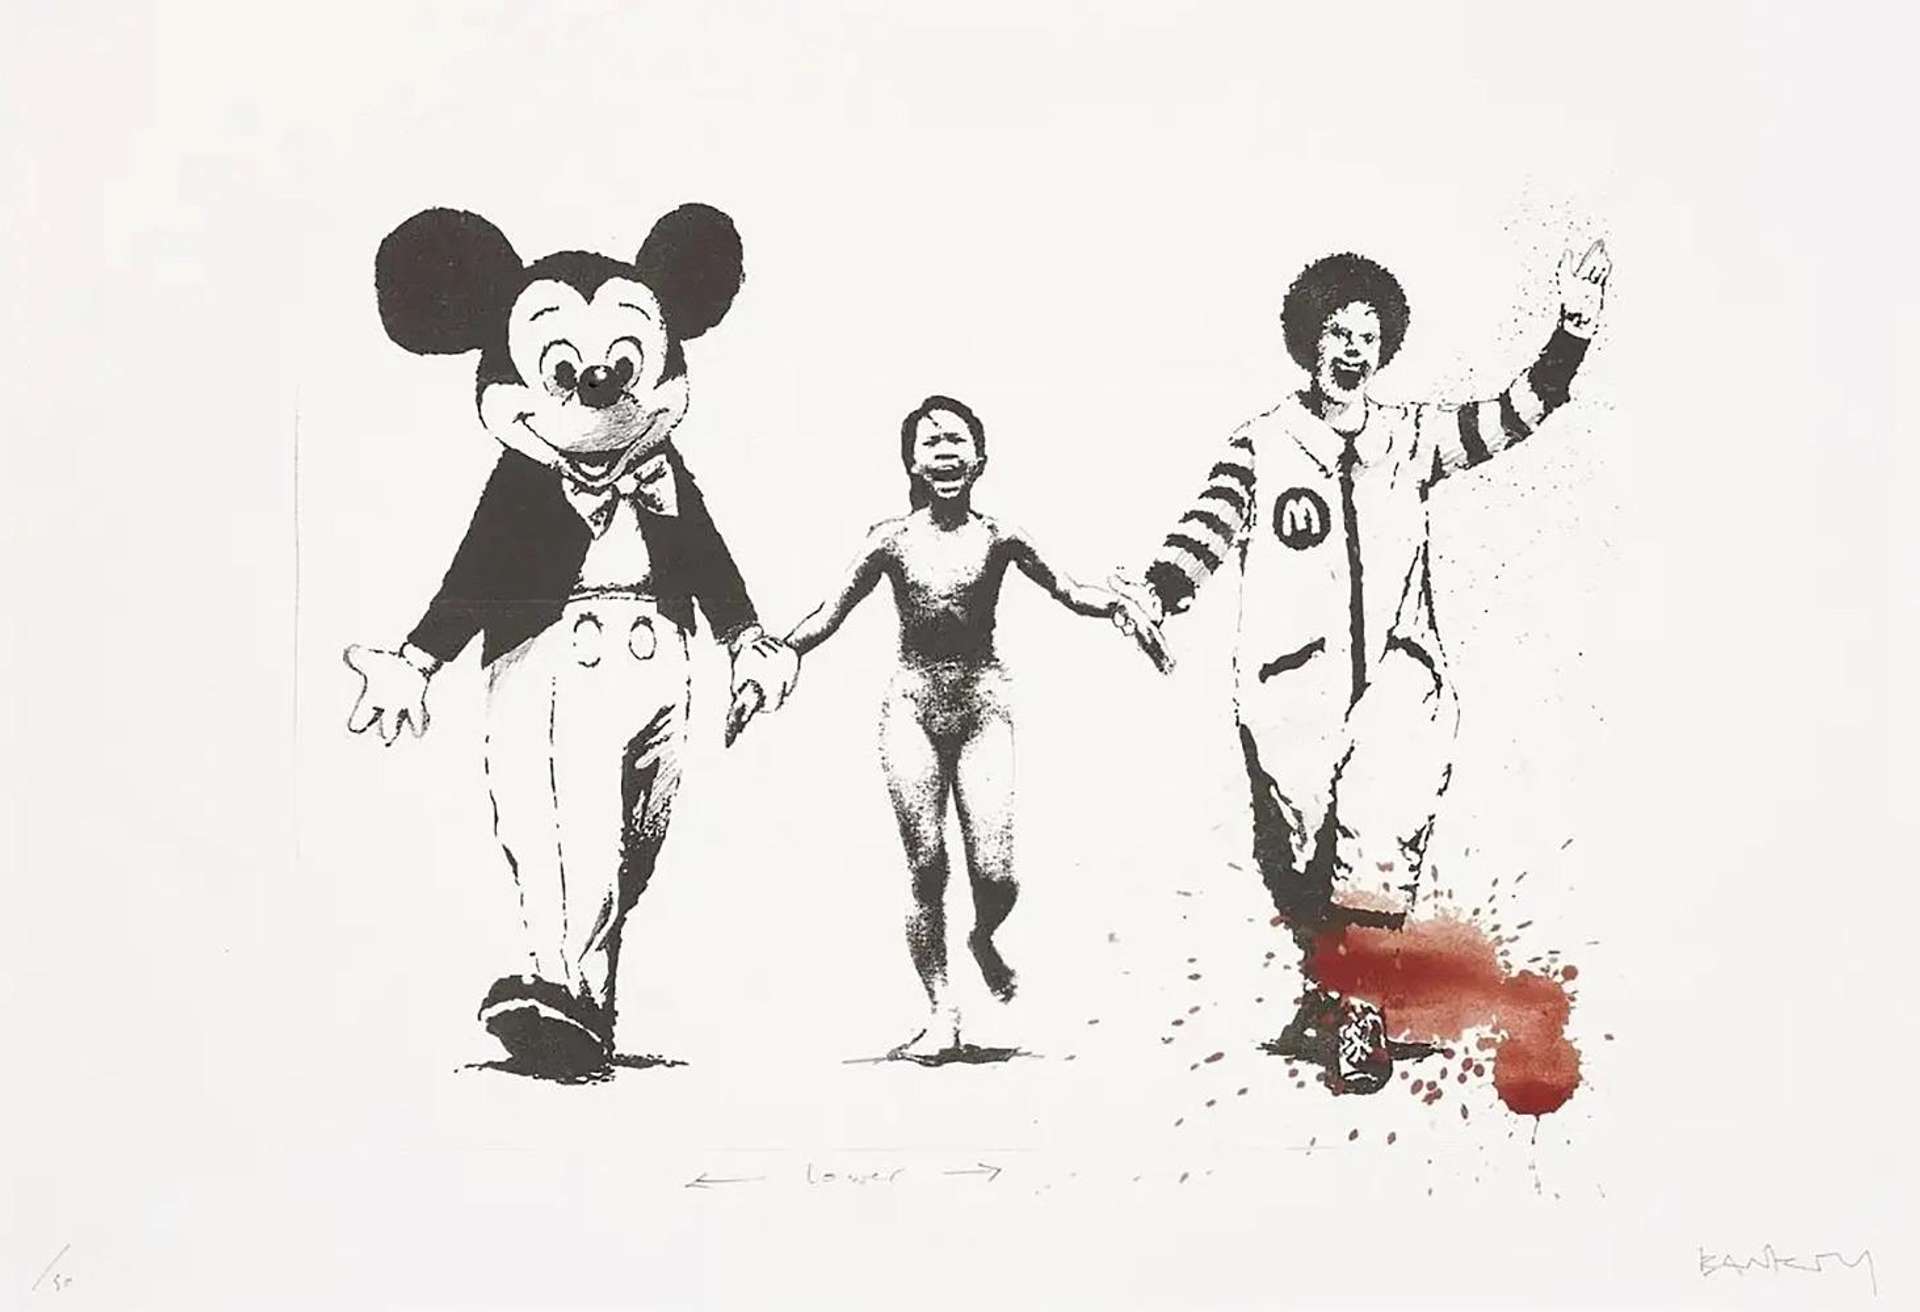 Napalm (special edition) by Banksy